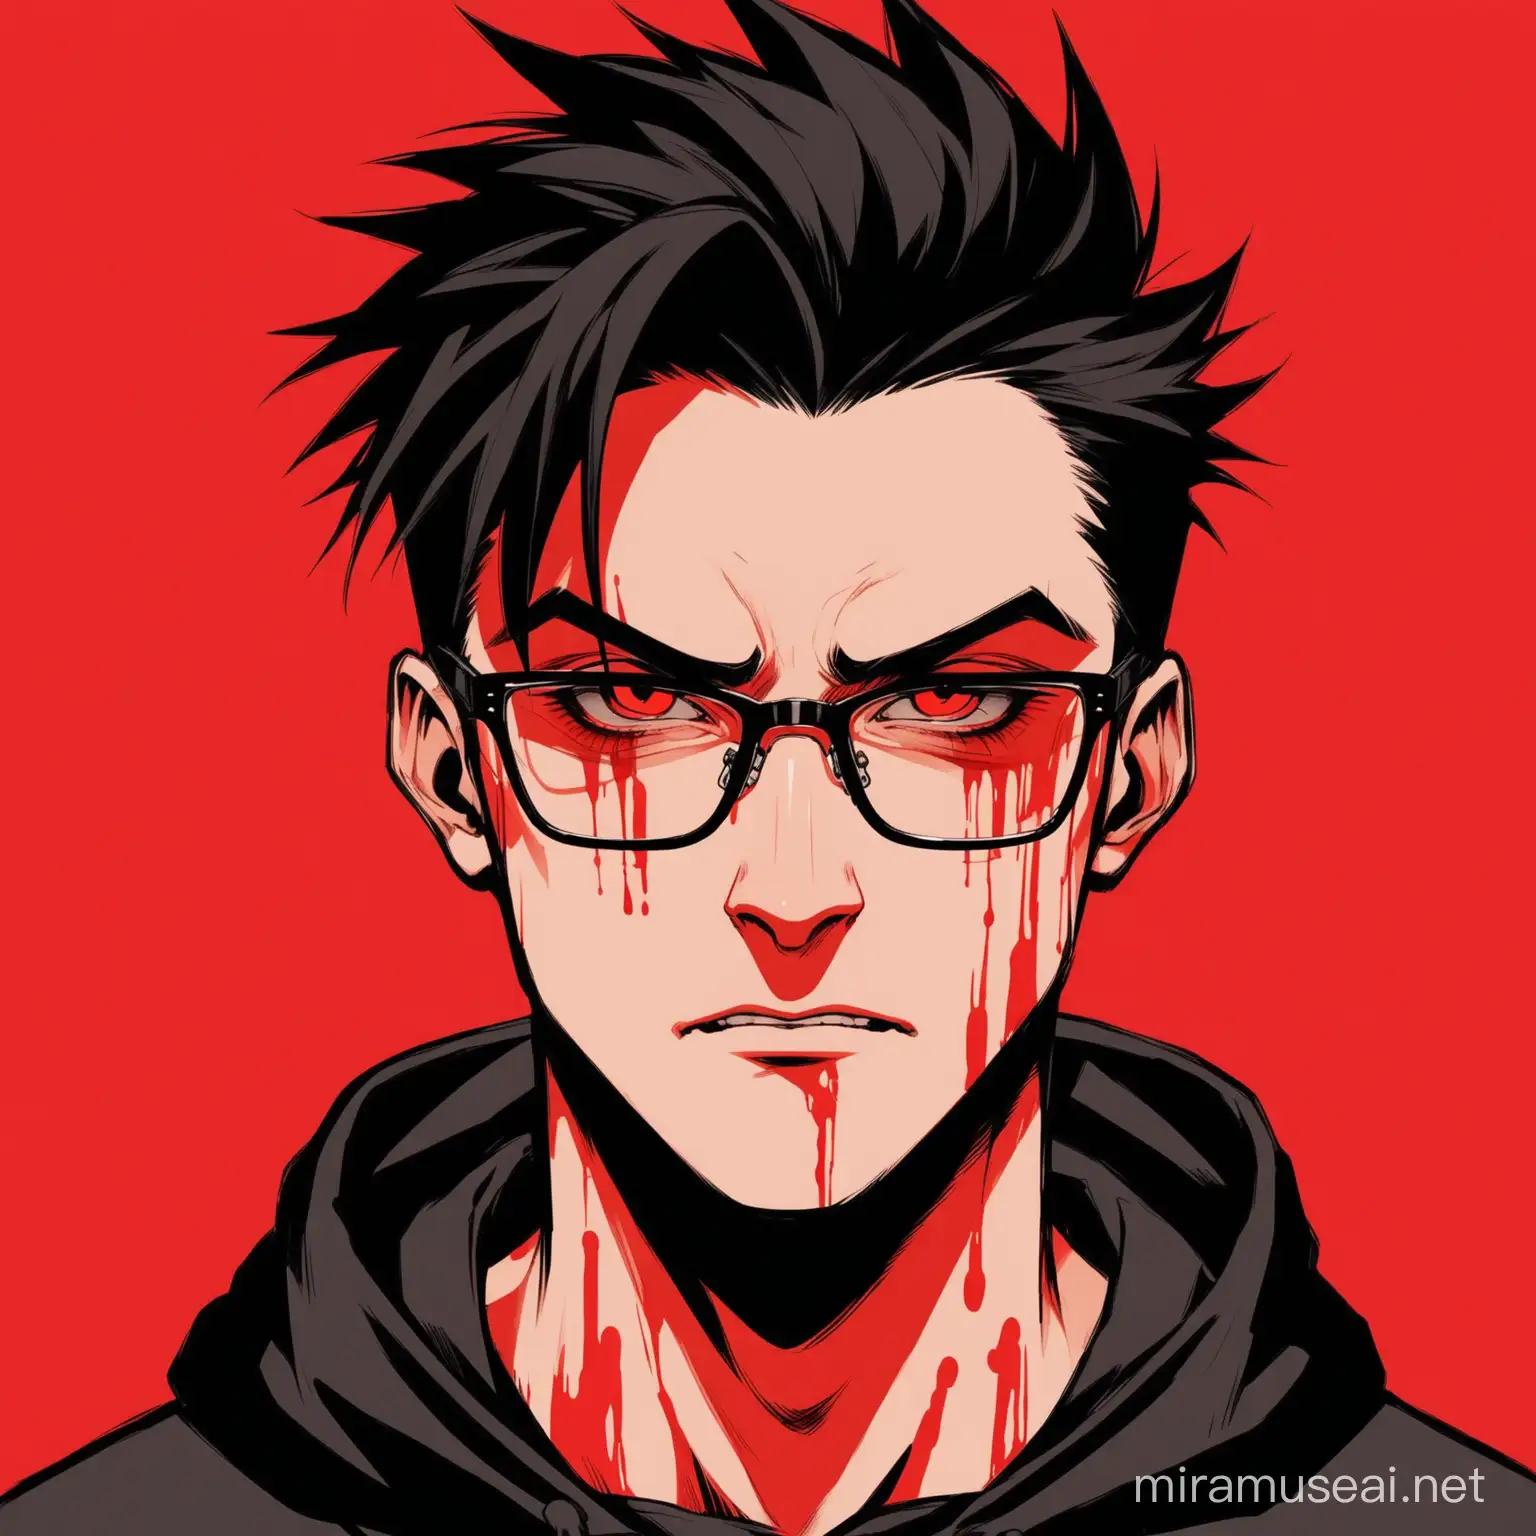 Stylish Hacker with Sinister Intentions on Red Background